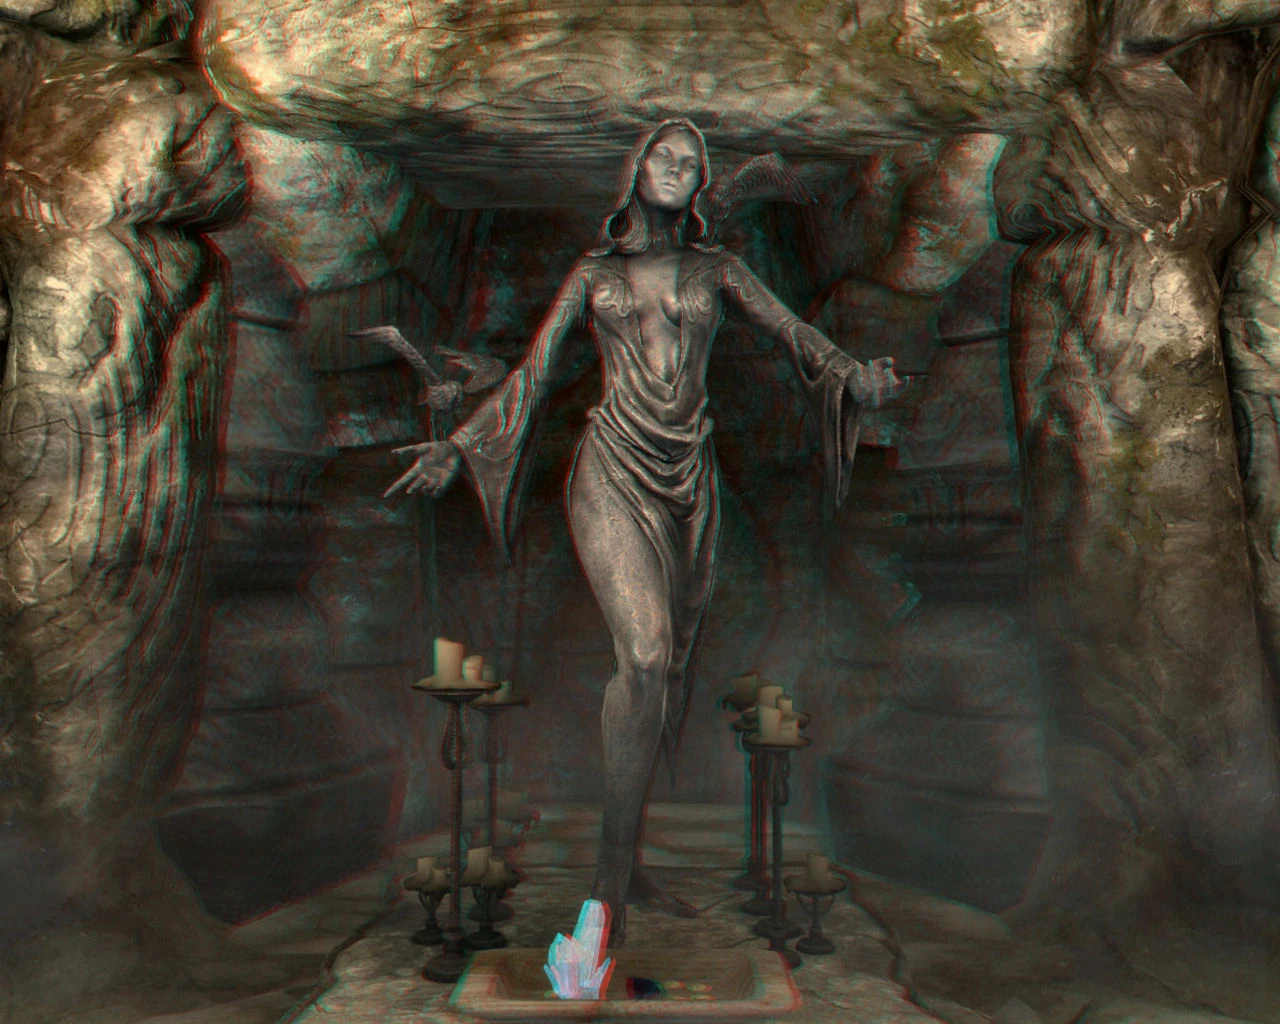 Standard partition Prosper Lady Nocturnal Statue In Anaglyphic 3D at Skyrim Nexus - Mods and Community